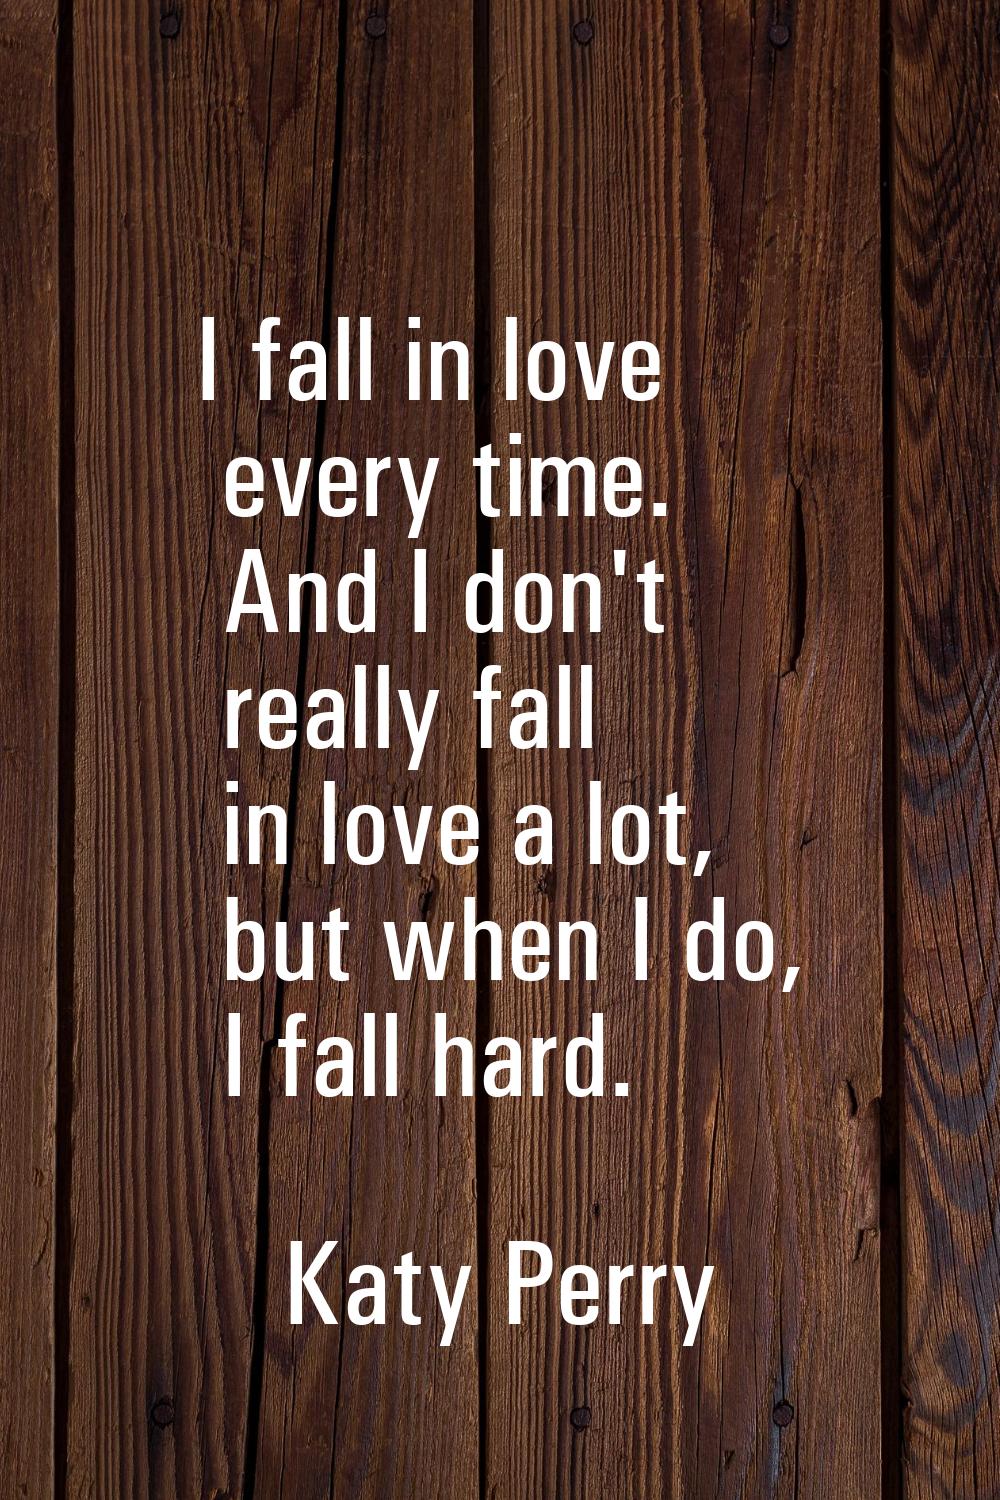 I fall in love every time. And I don't really fall in love a lot, but when I do, I fall hard.